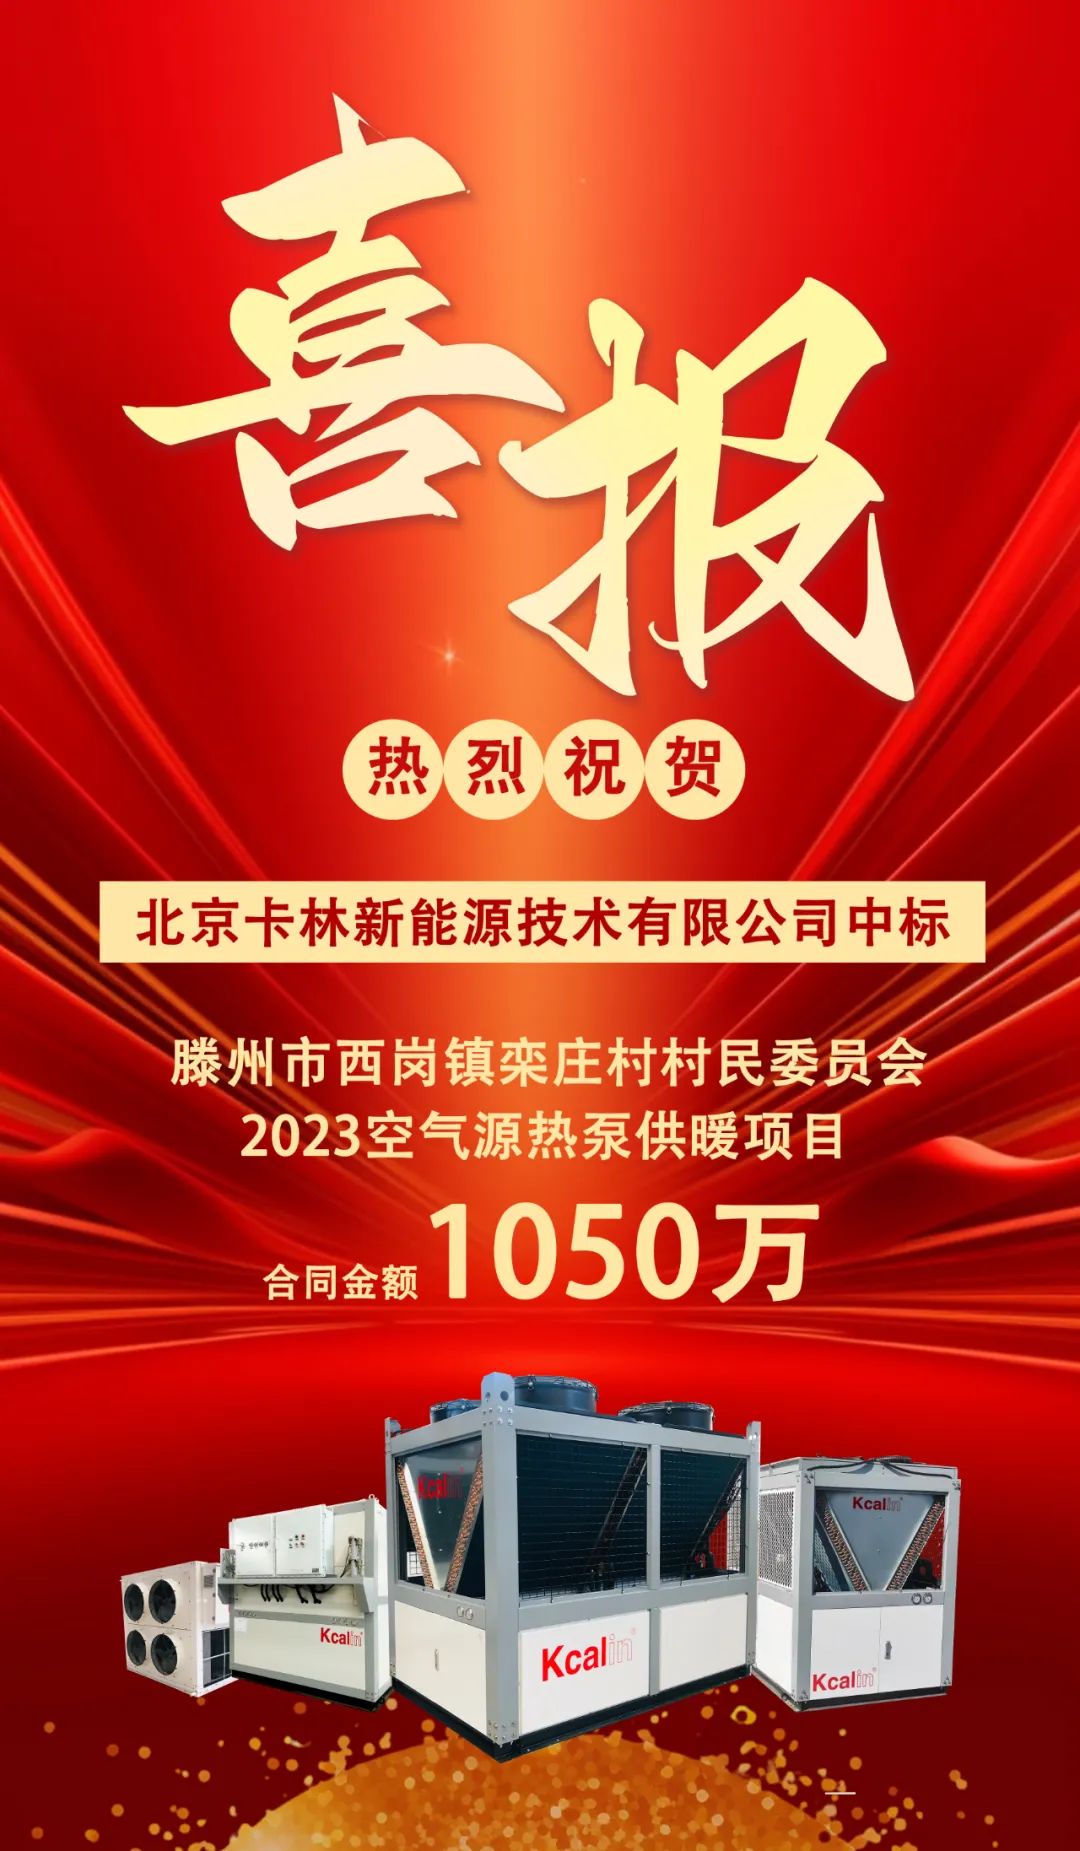 Congratulations on winning the bid for the Tengzhou Air Source Heat Pump Project with a contract amount of 10.5 million!